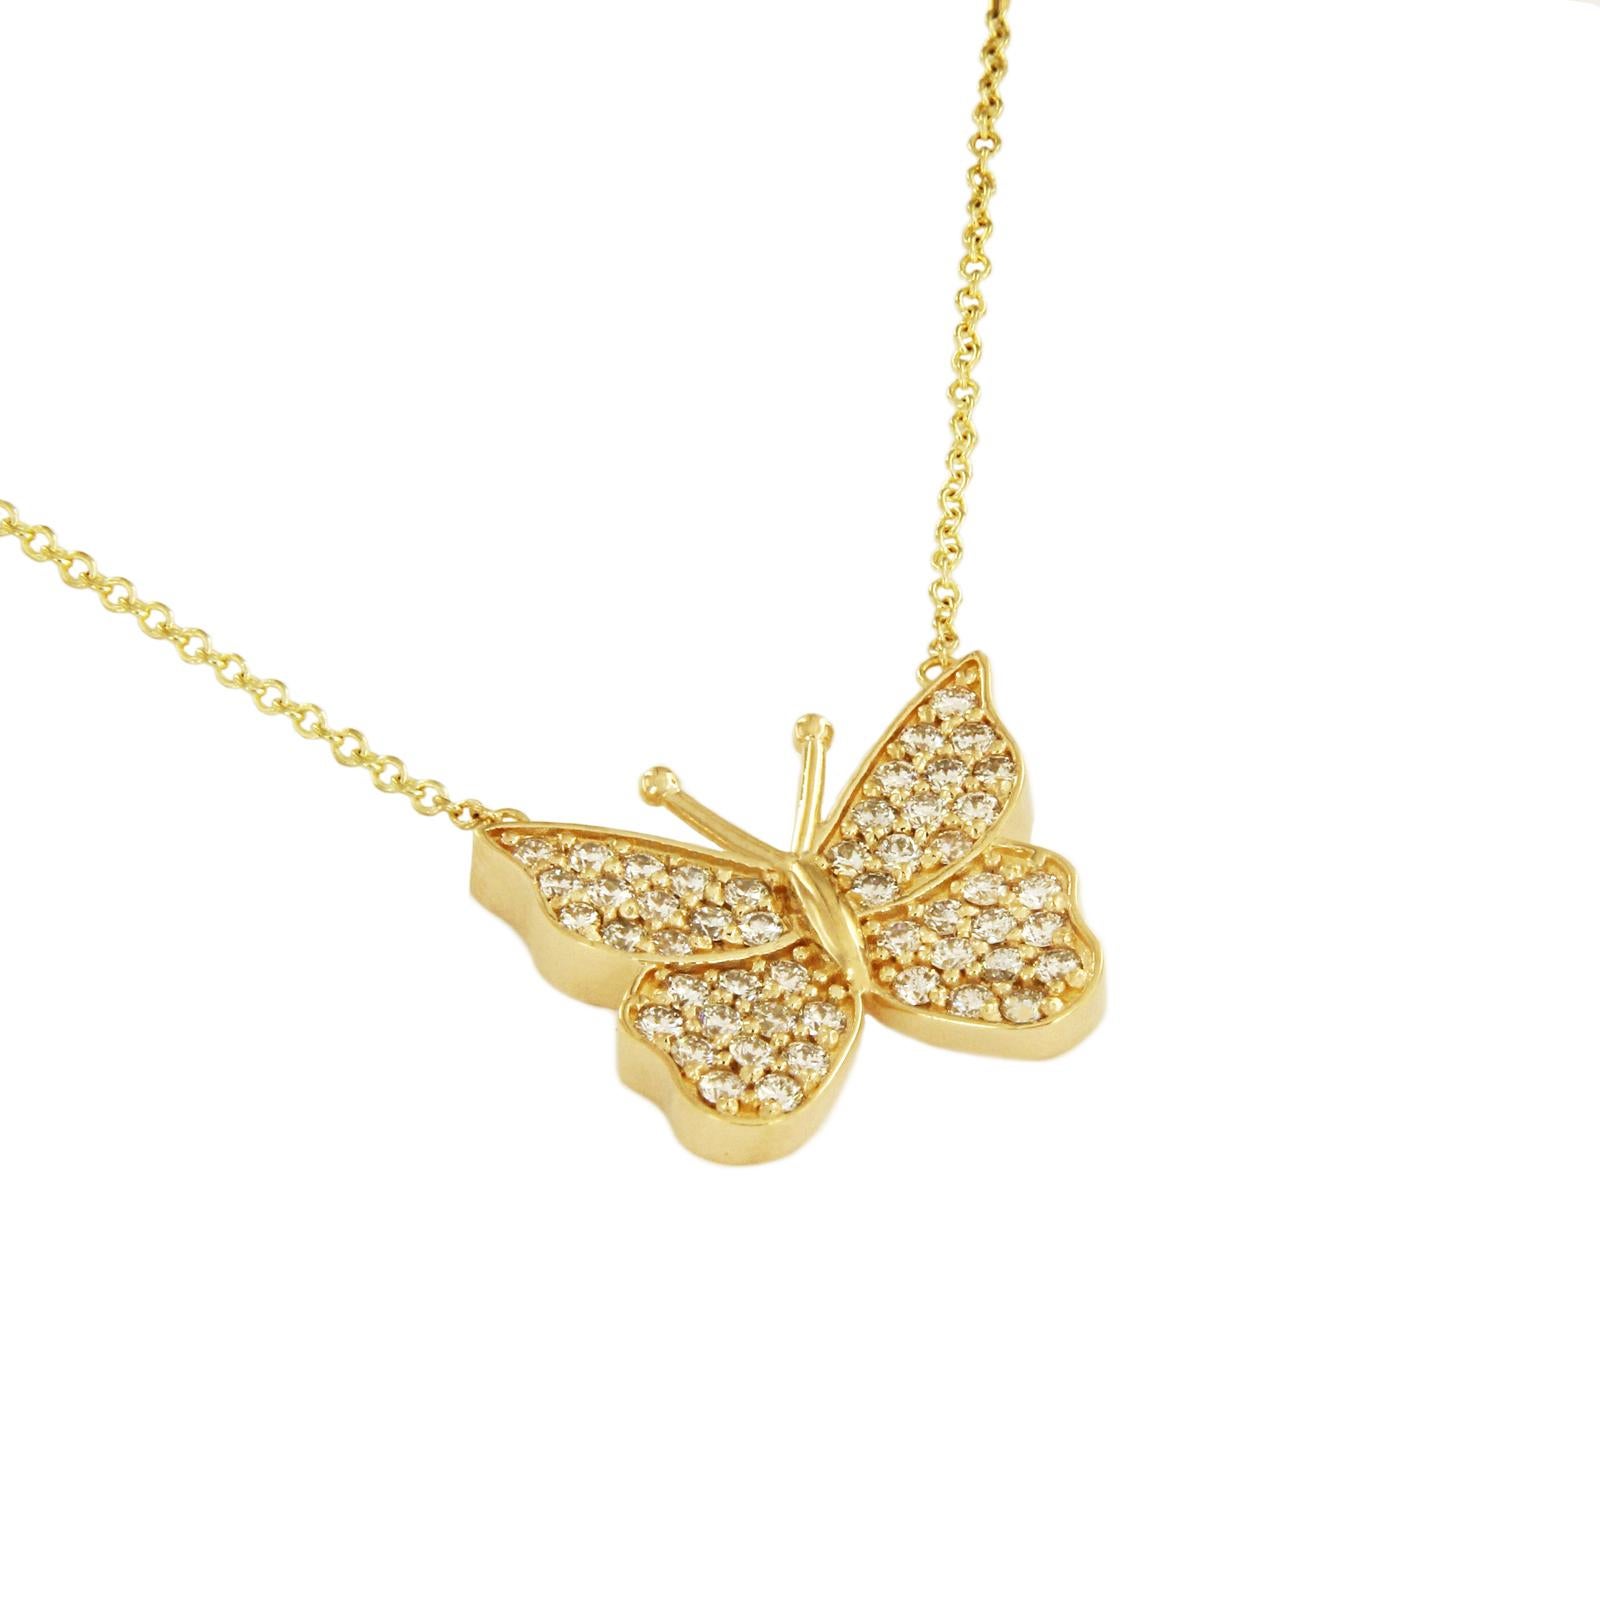 DIAMOND 1.5CT  BUTTERFLY NECKLACE IN 14K YELLOW GOLD 

-Mint condition
-14k Yellow Gold
-Diamond: 1.5ct, VS clarity, G color
-Pendant dimension: 16x19mm
-Length: 18.5”

RETAIL: $2550